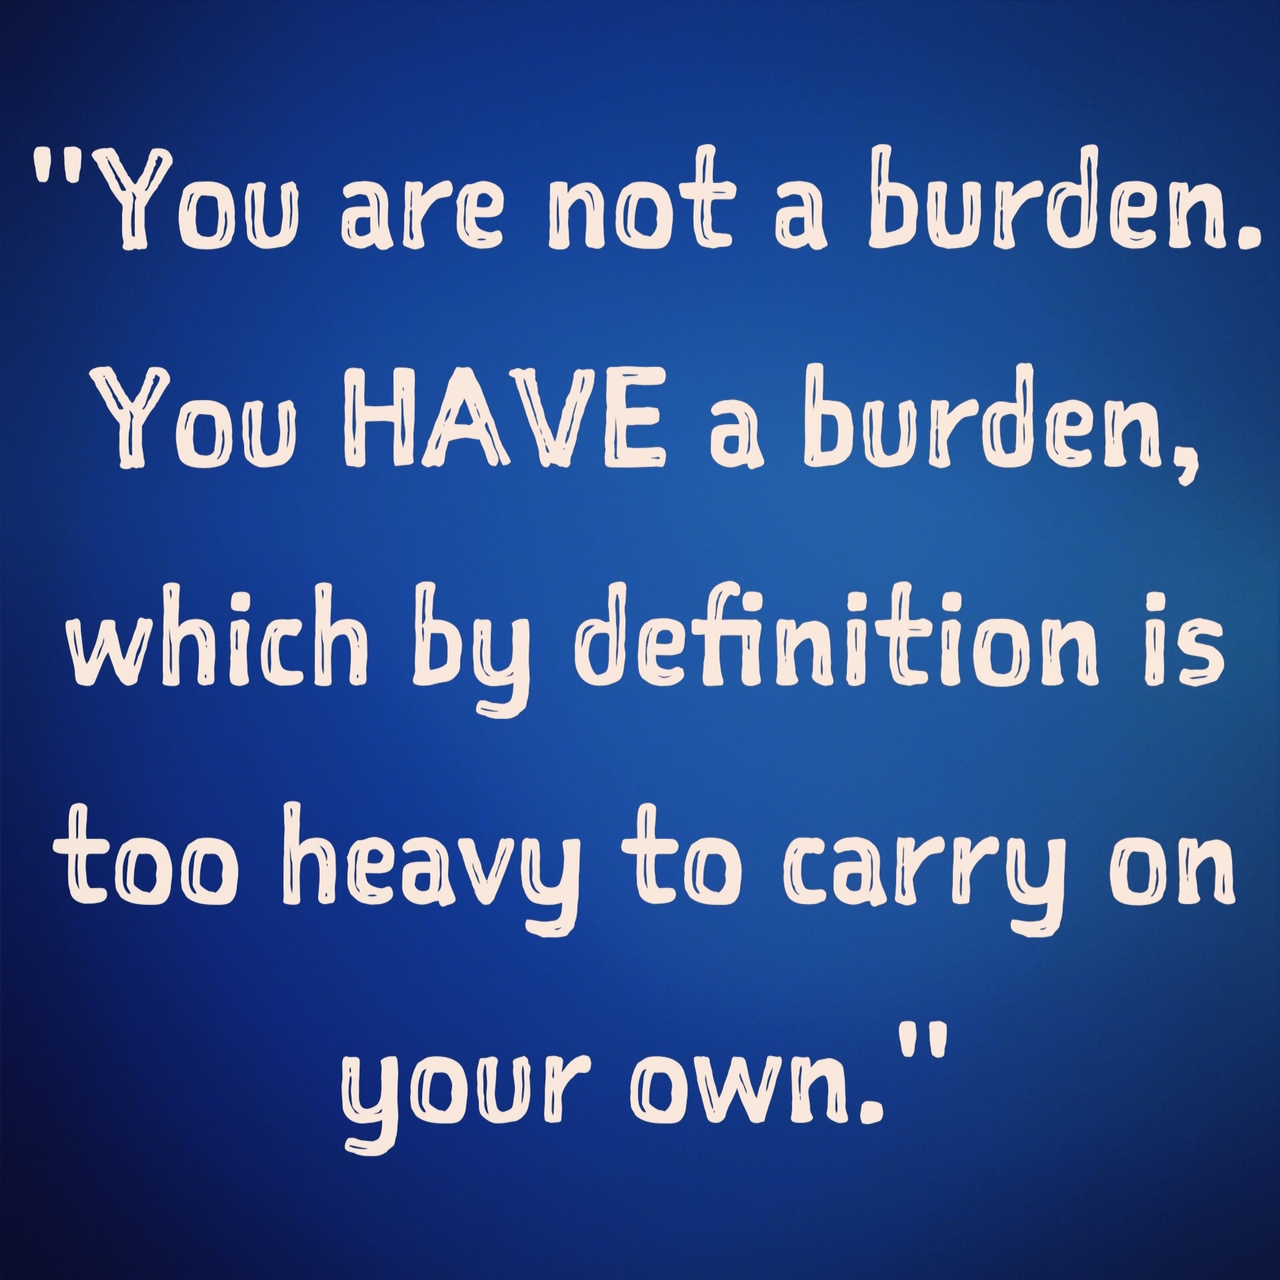 You are not a burden. You HAVE a burden, which by definition is too heavy to carry on your own